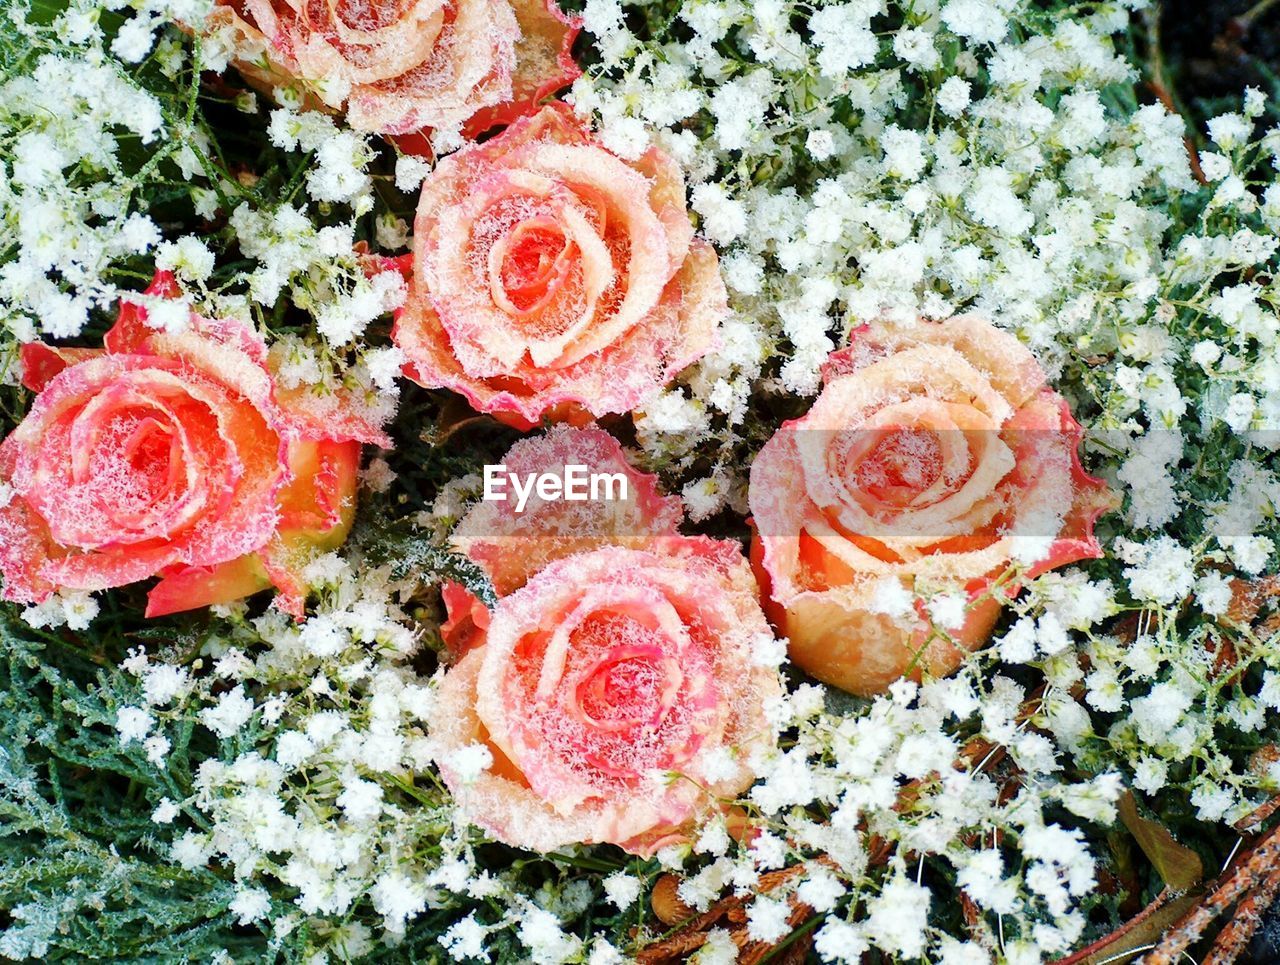 High angle view of flowers in bouquet